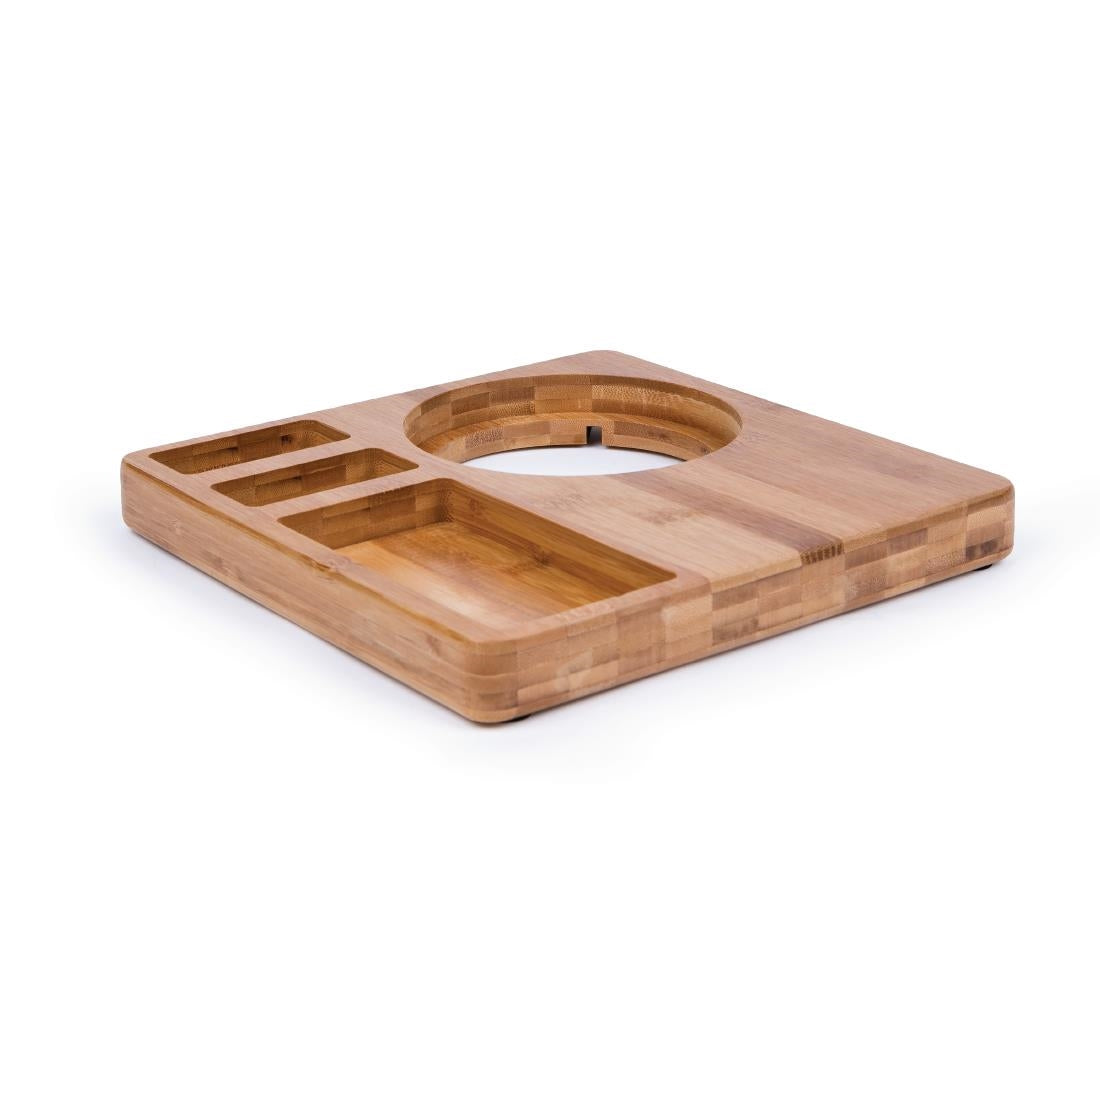 Bamboo Hotel Welcome Tray JD Catering Equipment Solutions Ltd